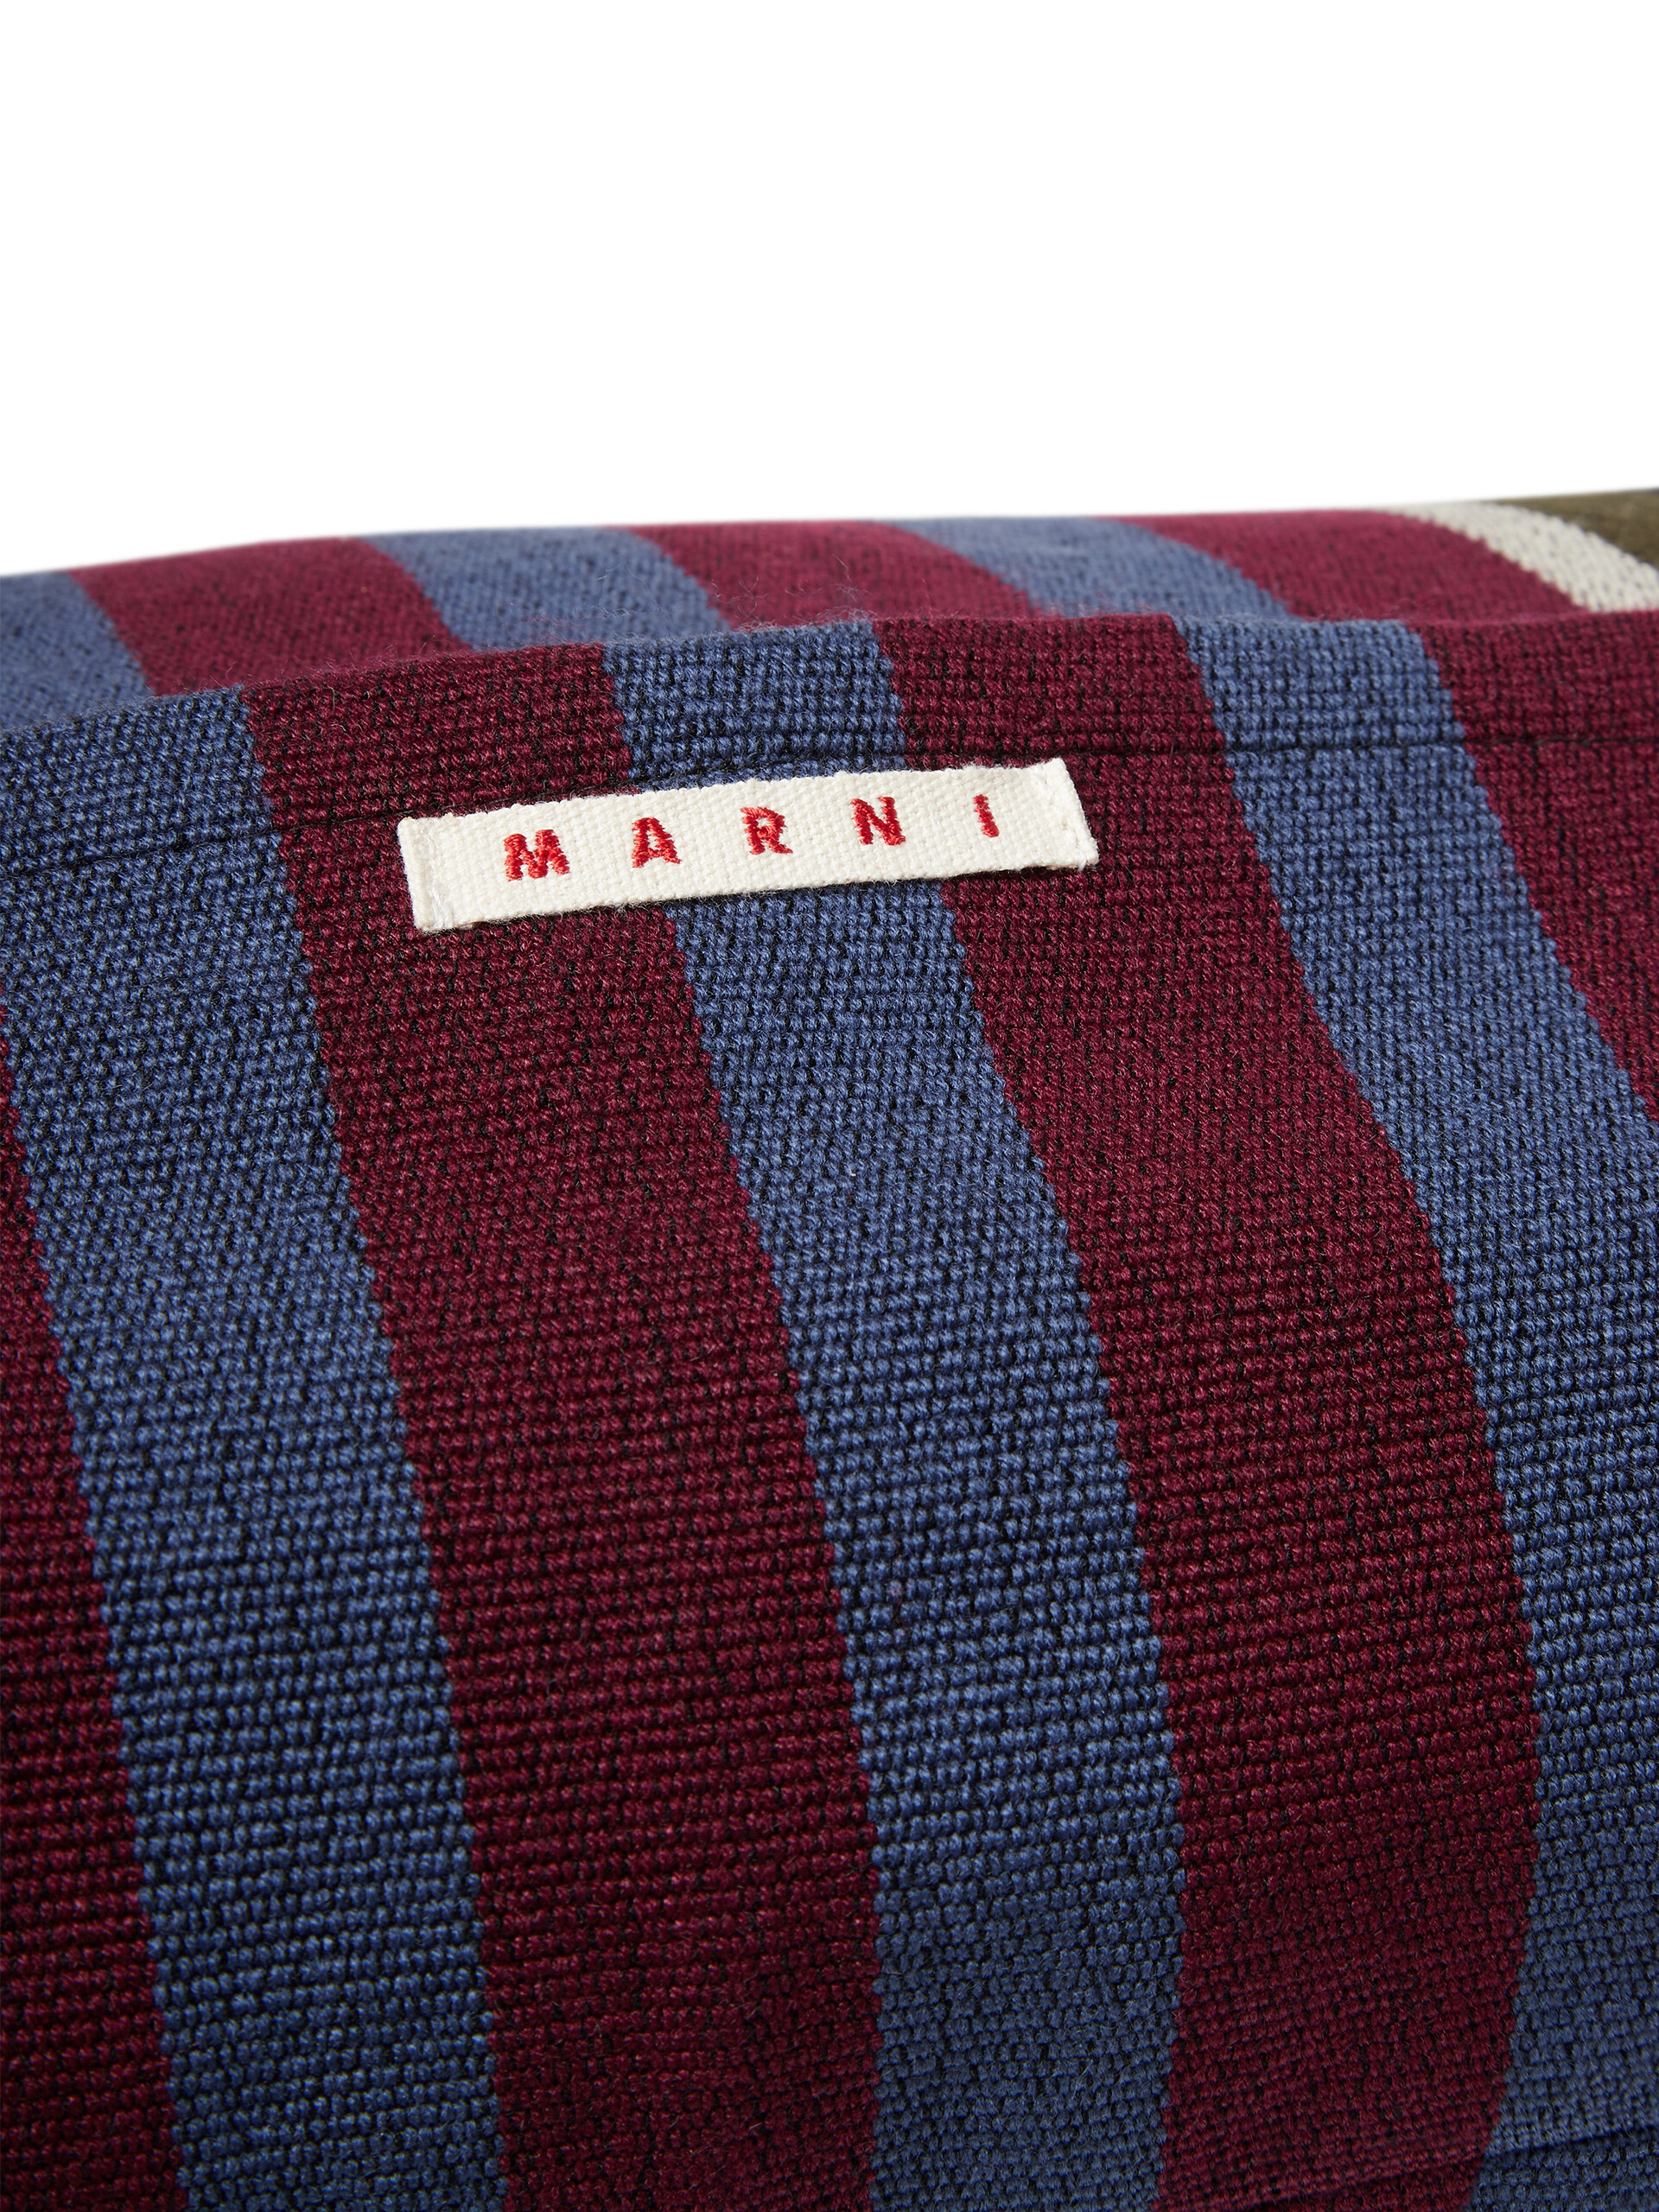 MARNI MARKET rectangular pillow cover in polyester green burgundy and pale blue - Furniture - Image 3